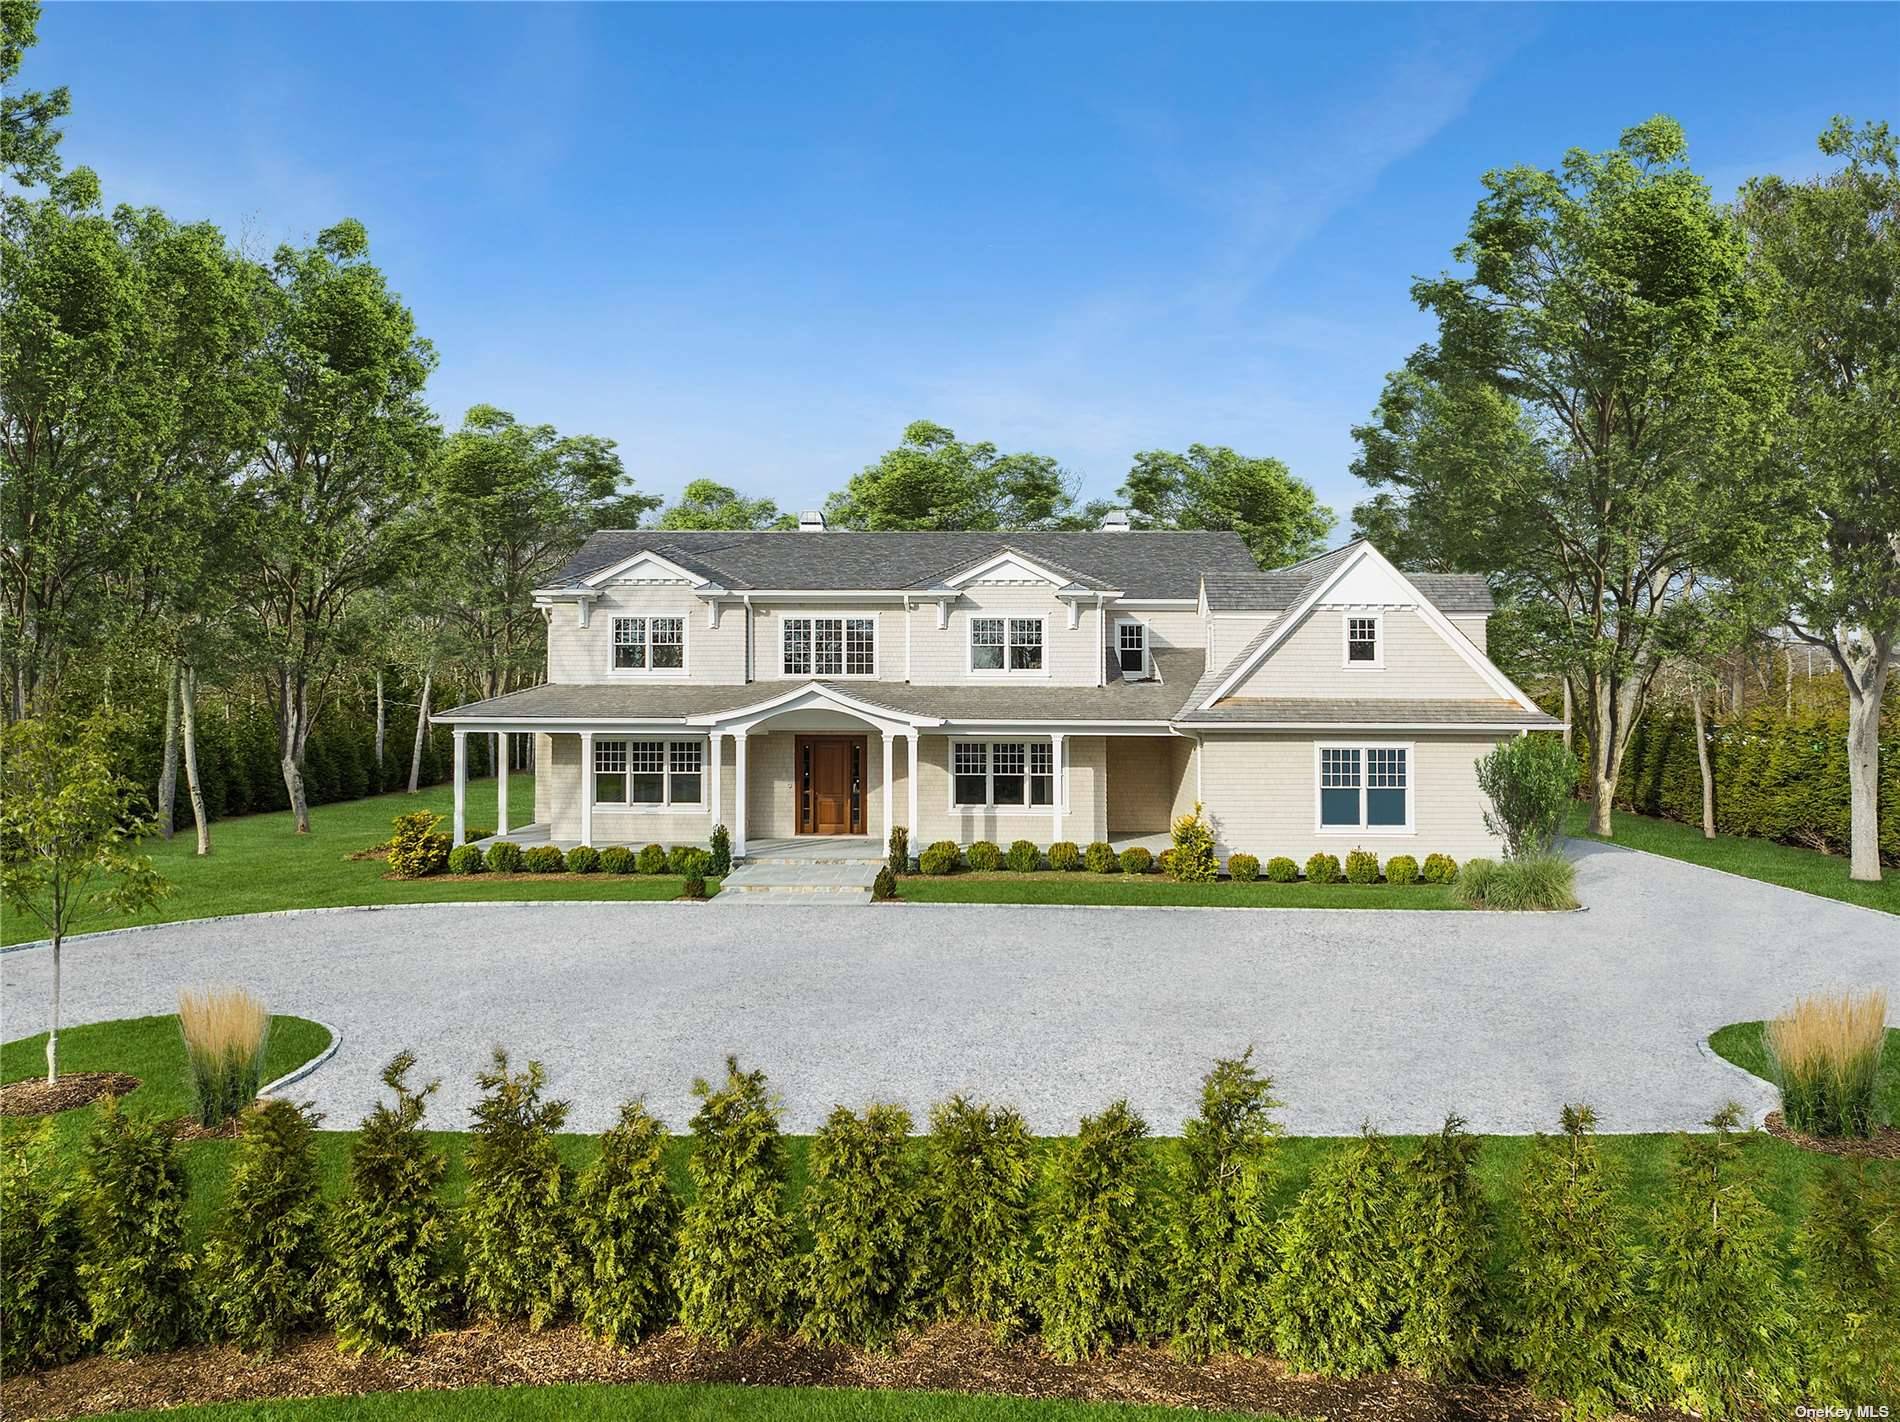 Introducing an exquisite new construction in the highly sought after village of Quogue.